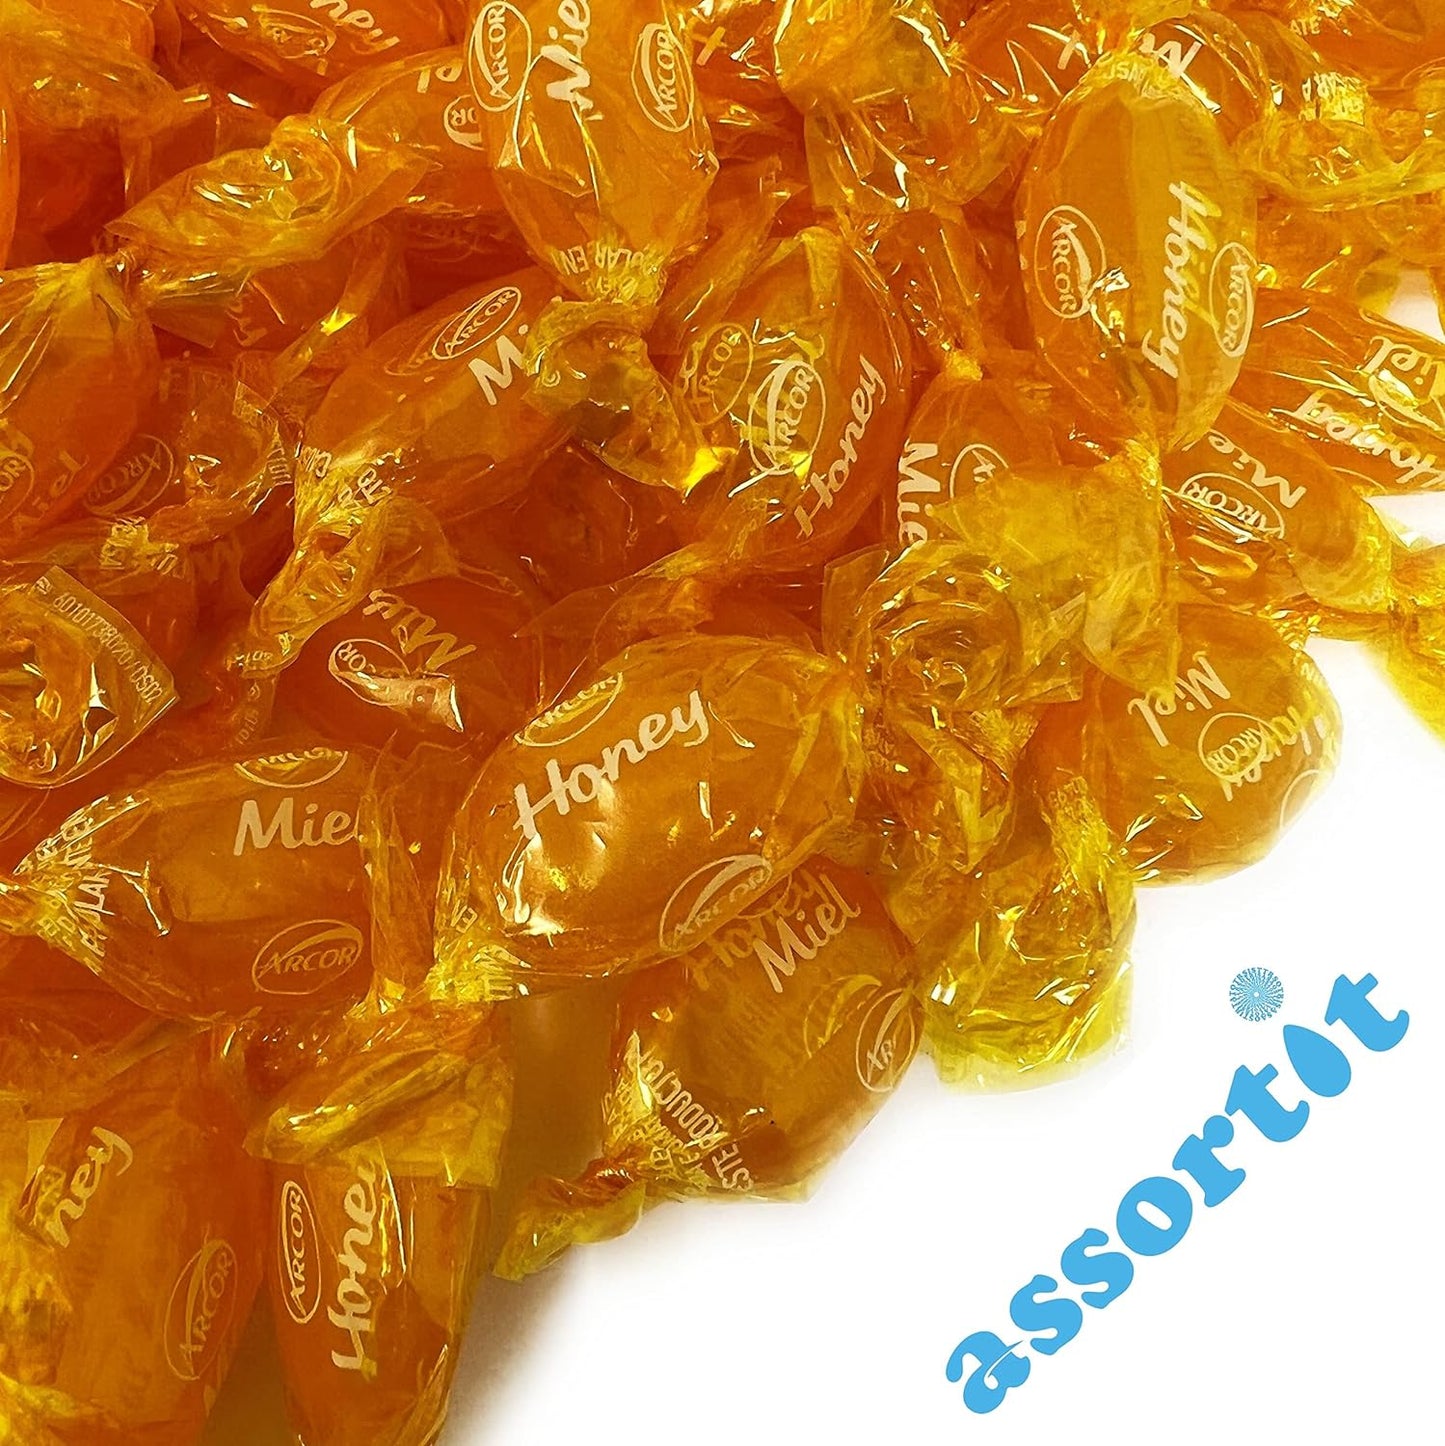 Assortit Arcor Real Honey Filled Hard Candy - 3 lbs - Honey Flavored Classic 48 oz.